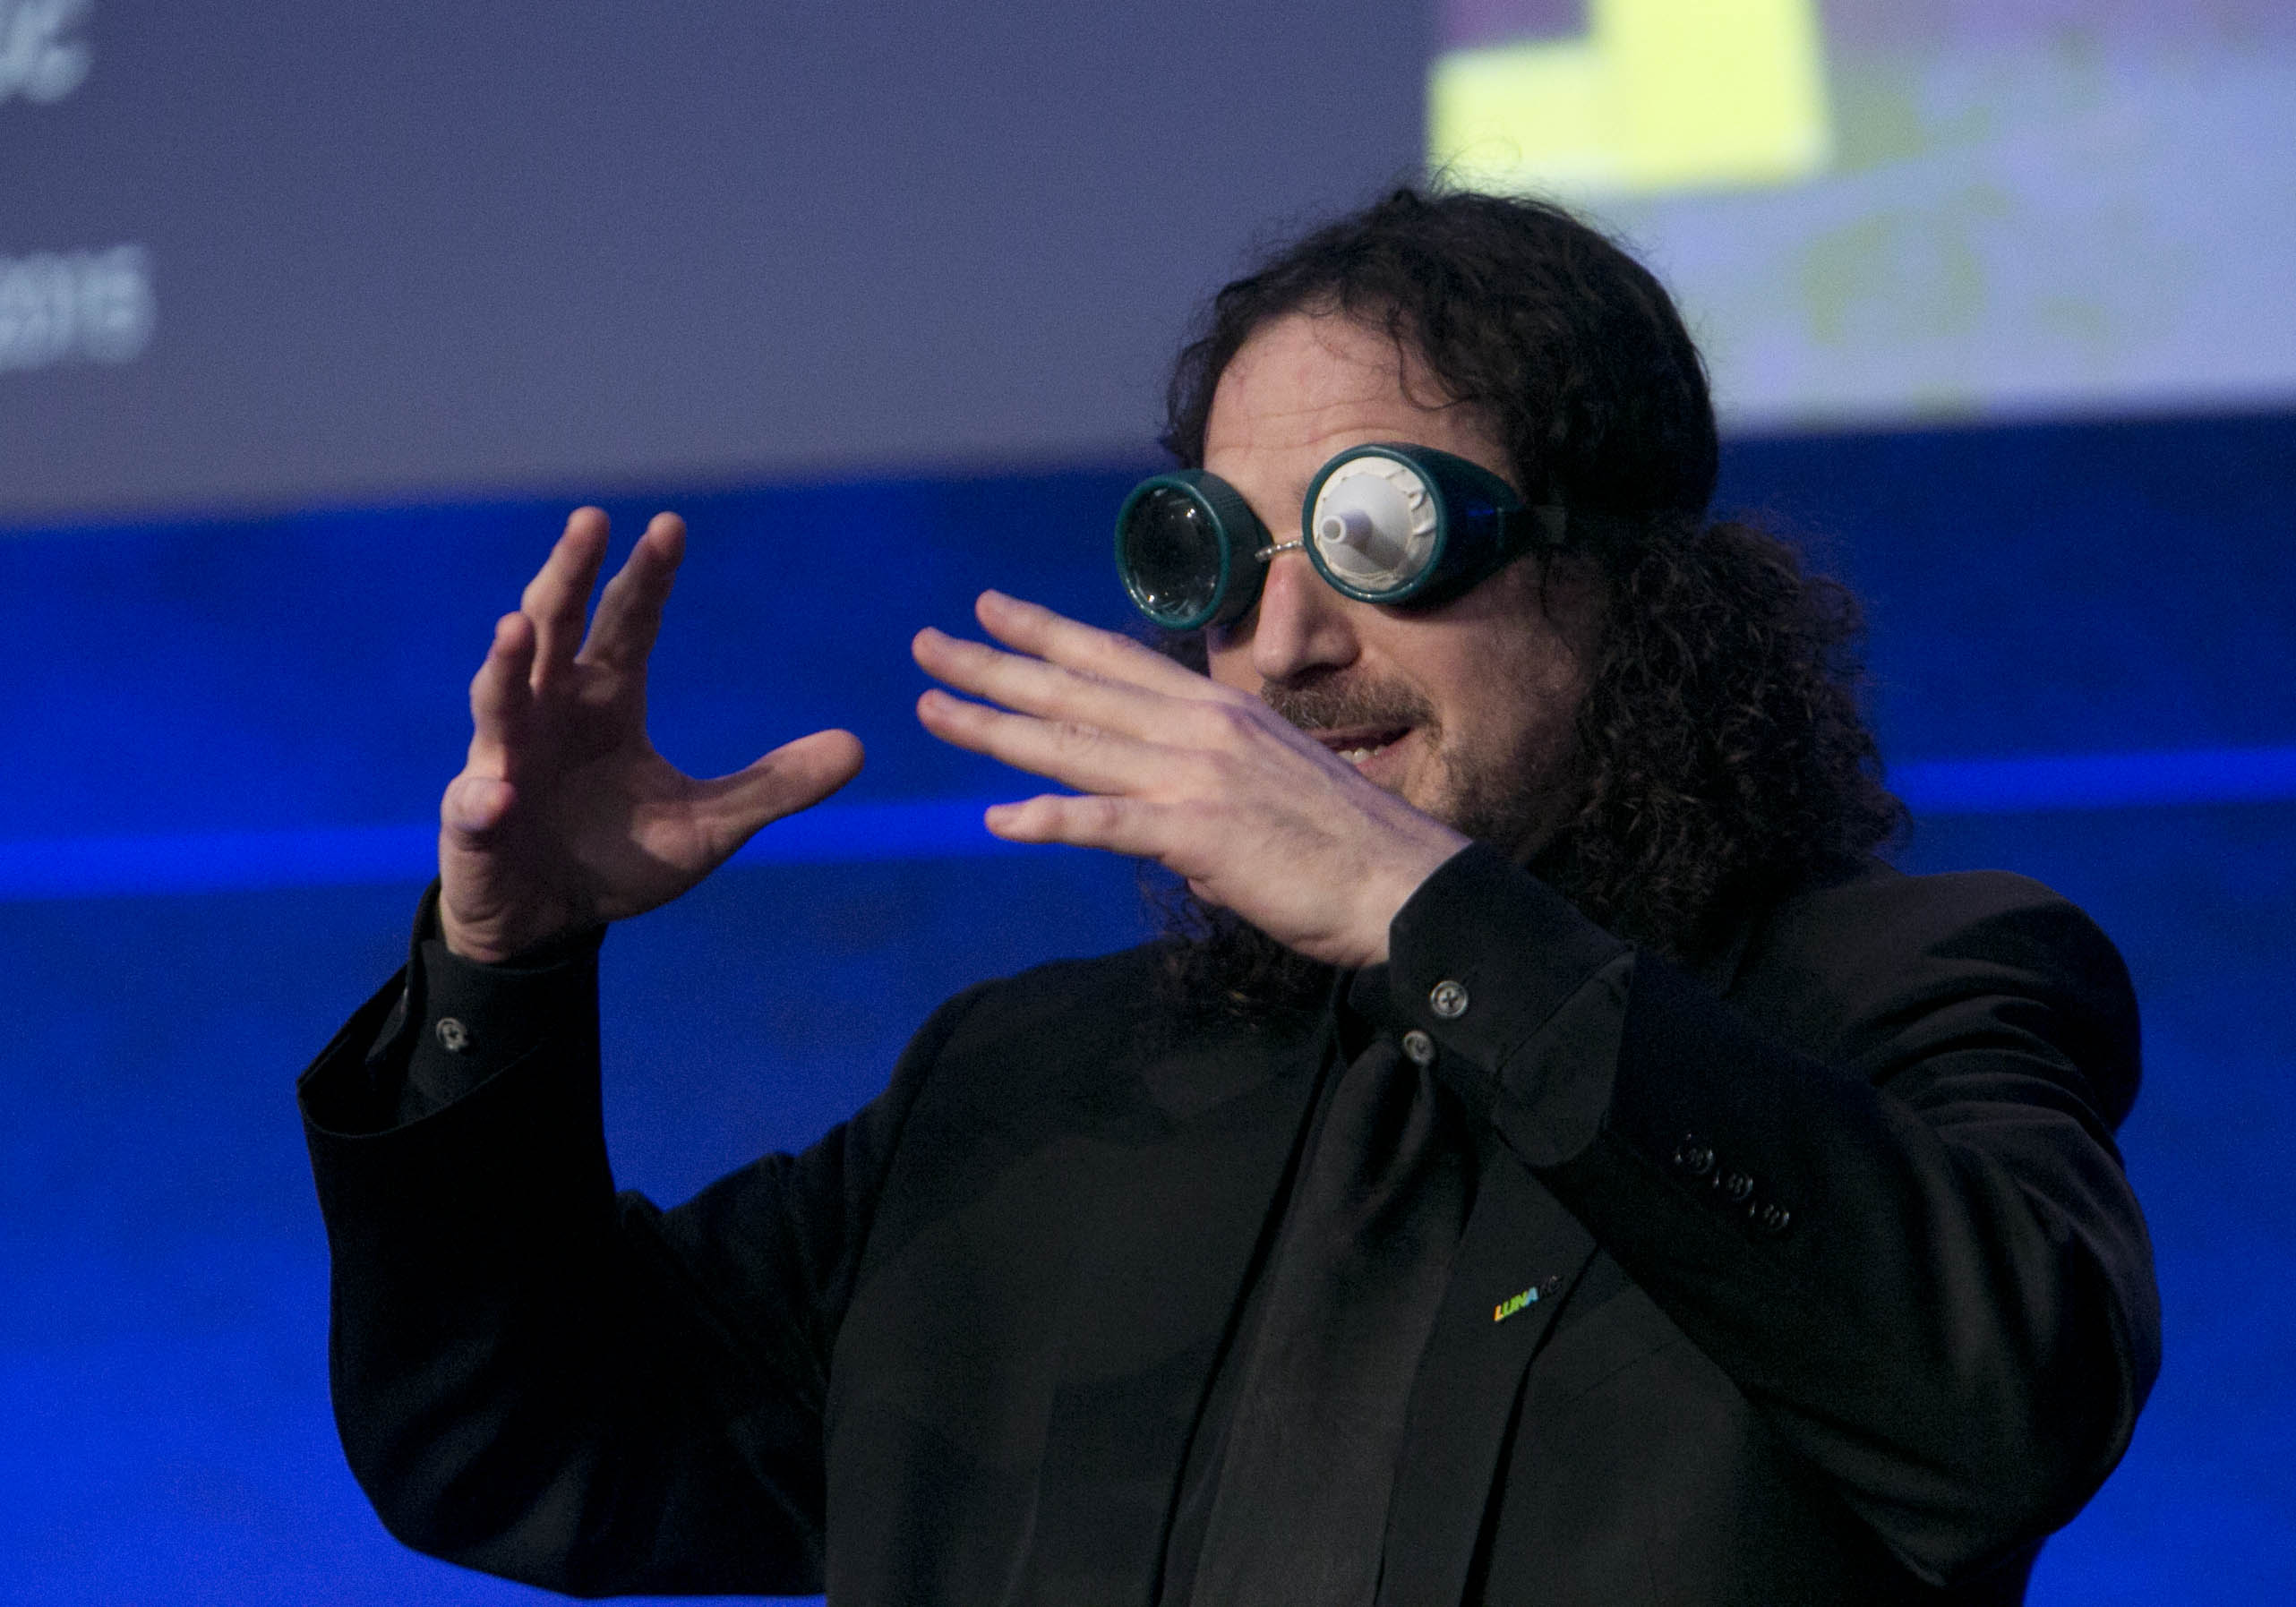 photo of David Berman wearing a microphone, speaking on stage wearing vision impairment simulation goggles